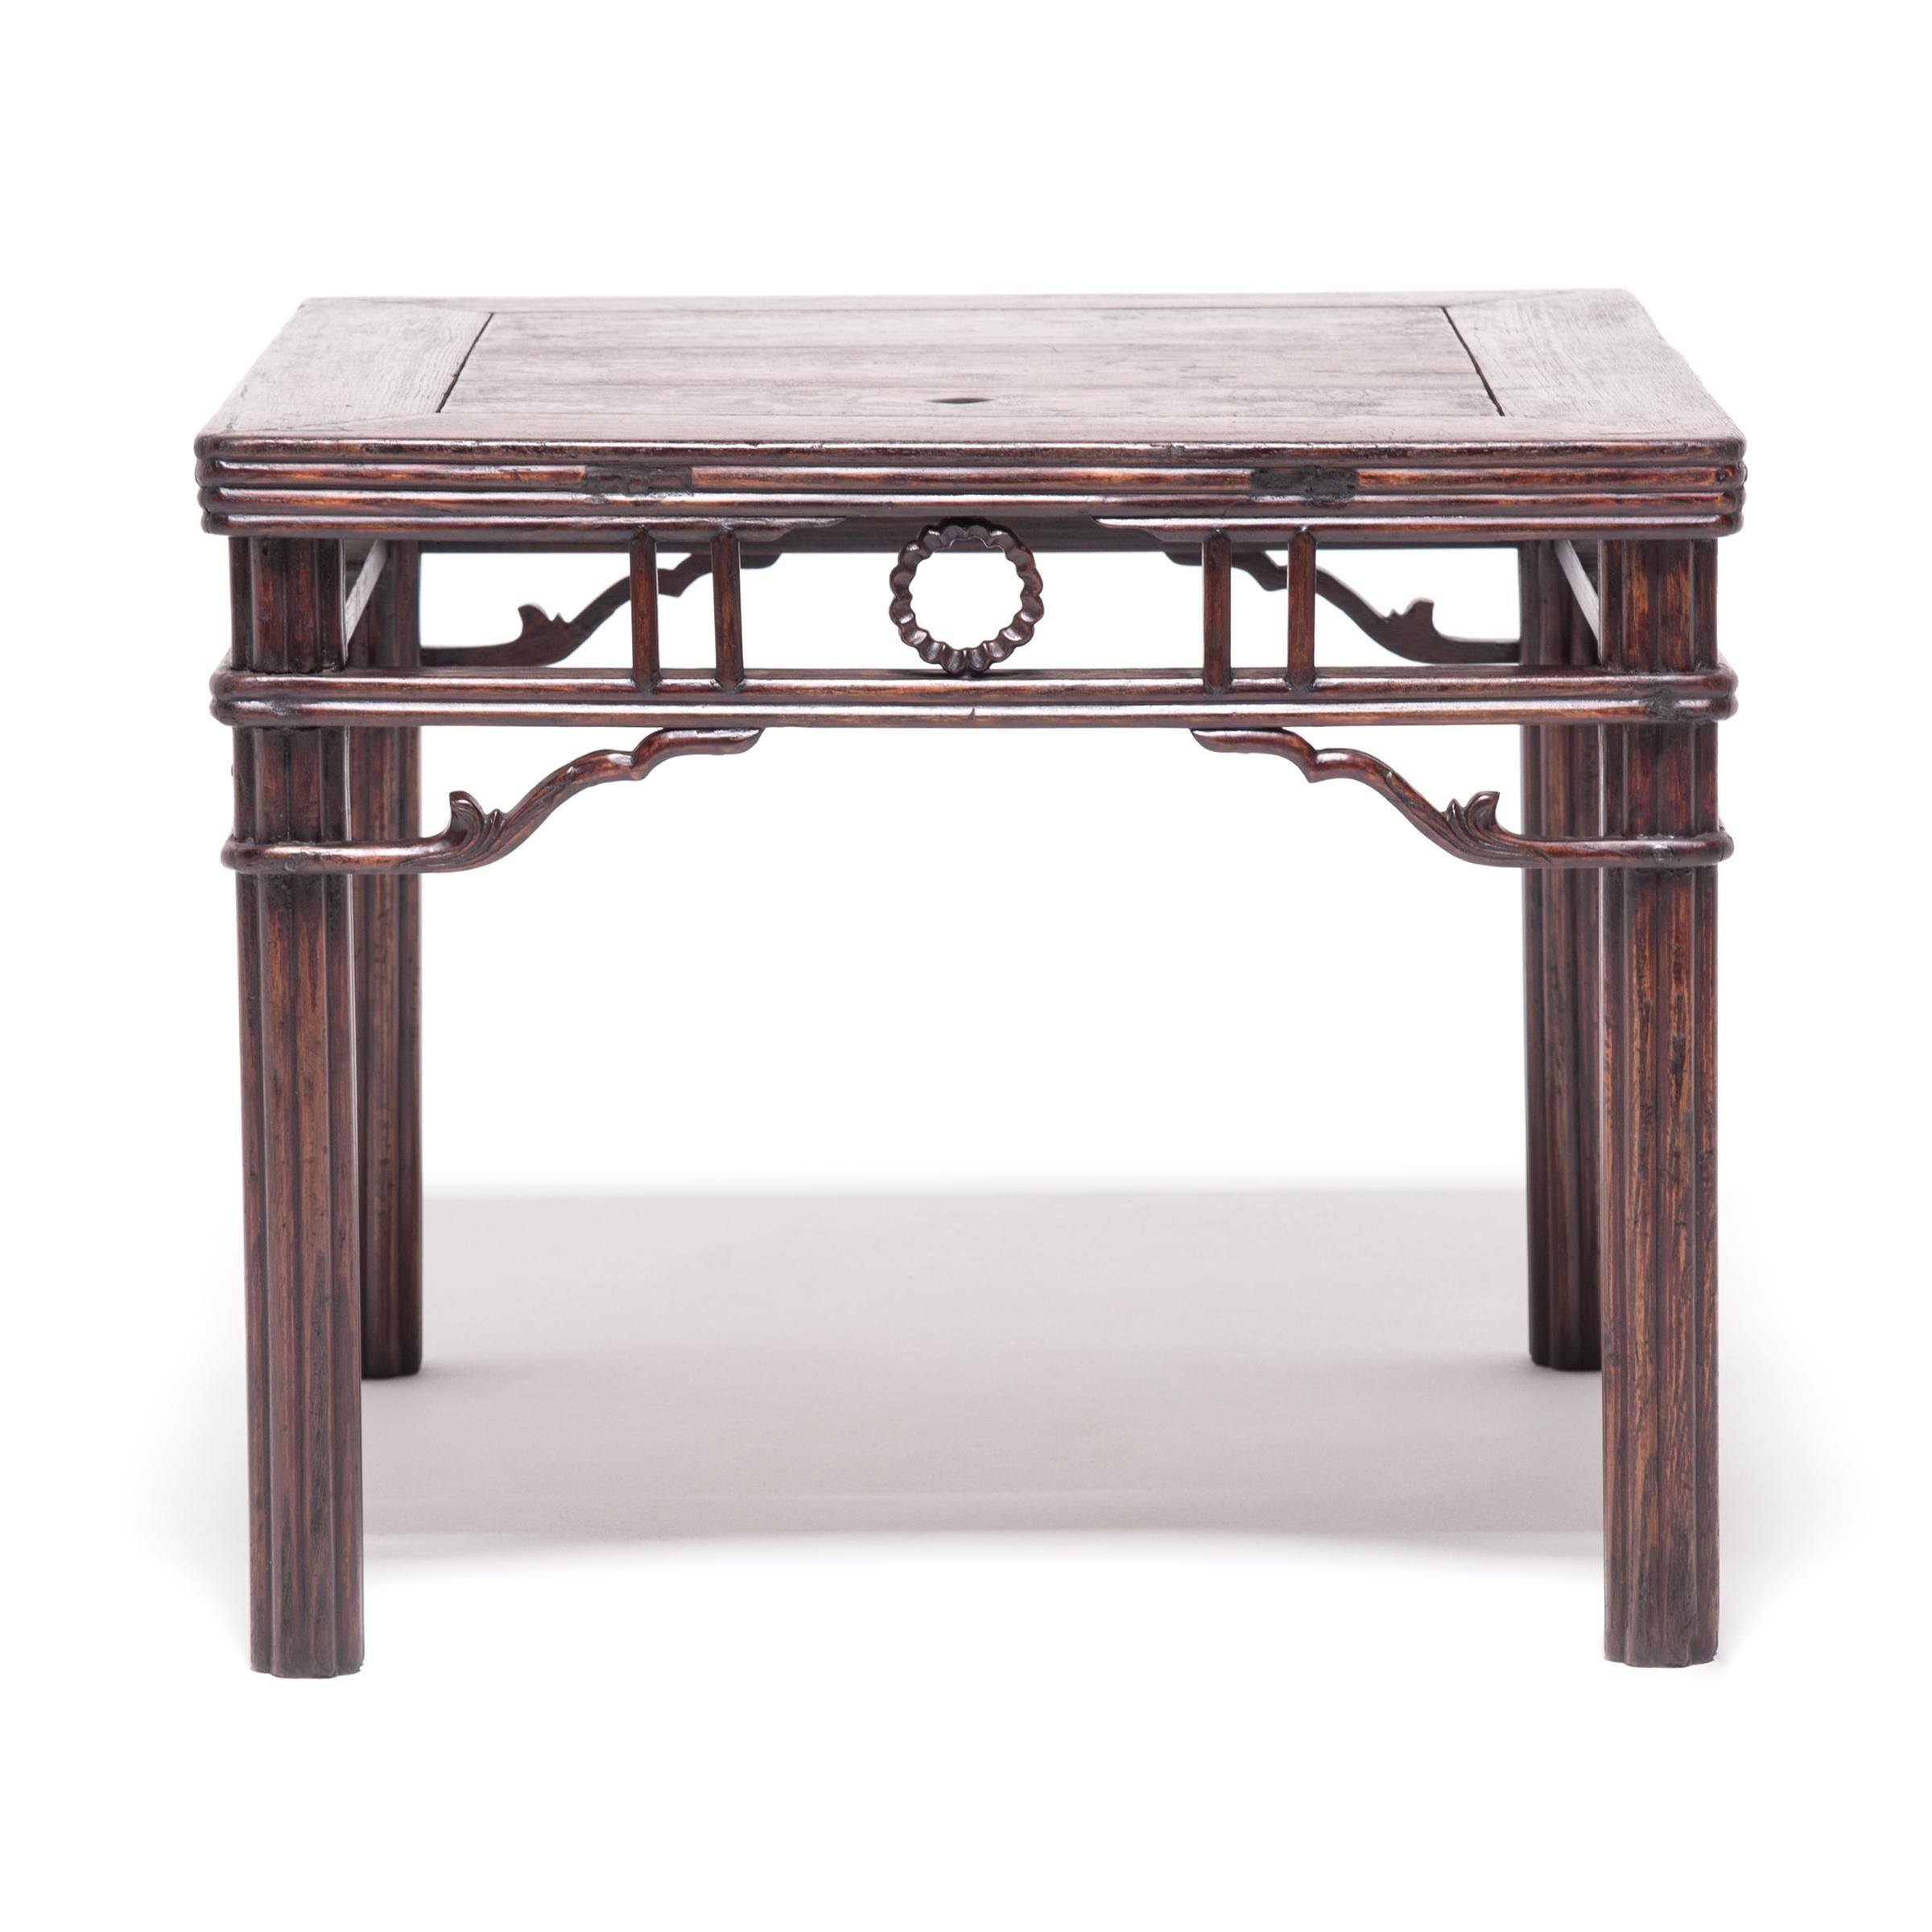 Hand-Carved Chinese Square Chrysanthemum Table, circa 1850